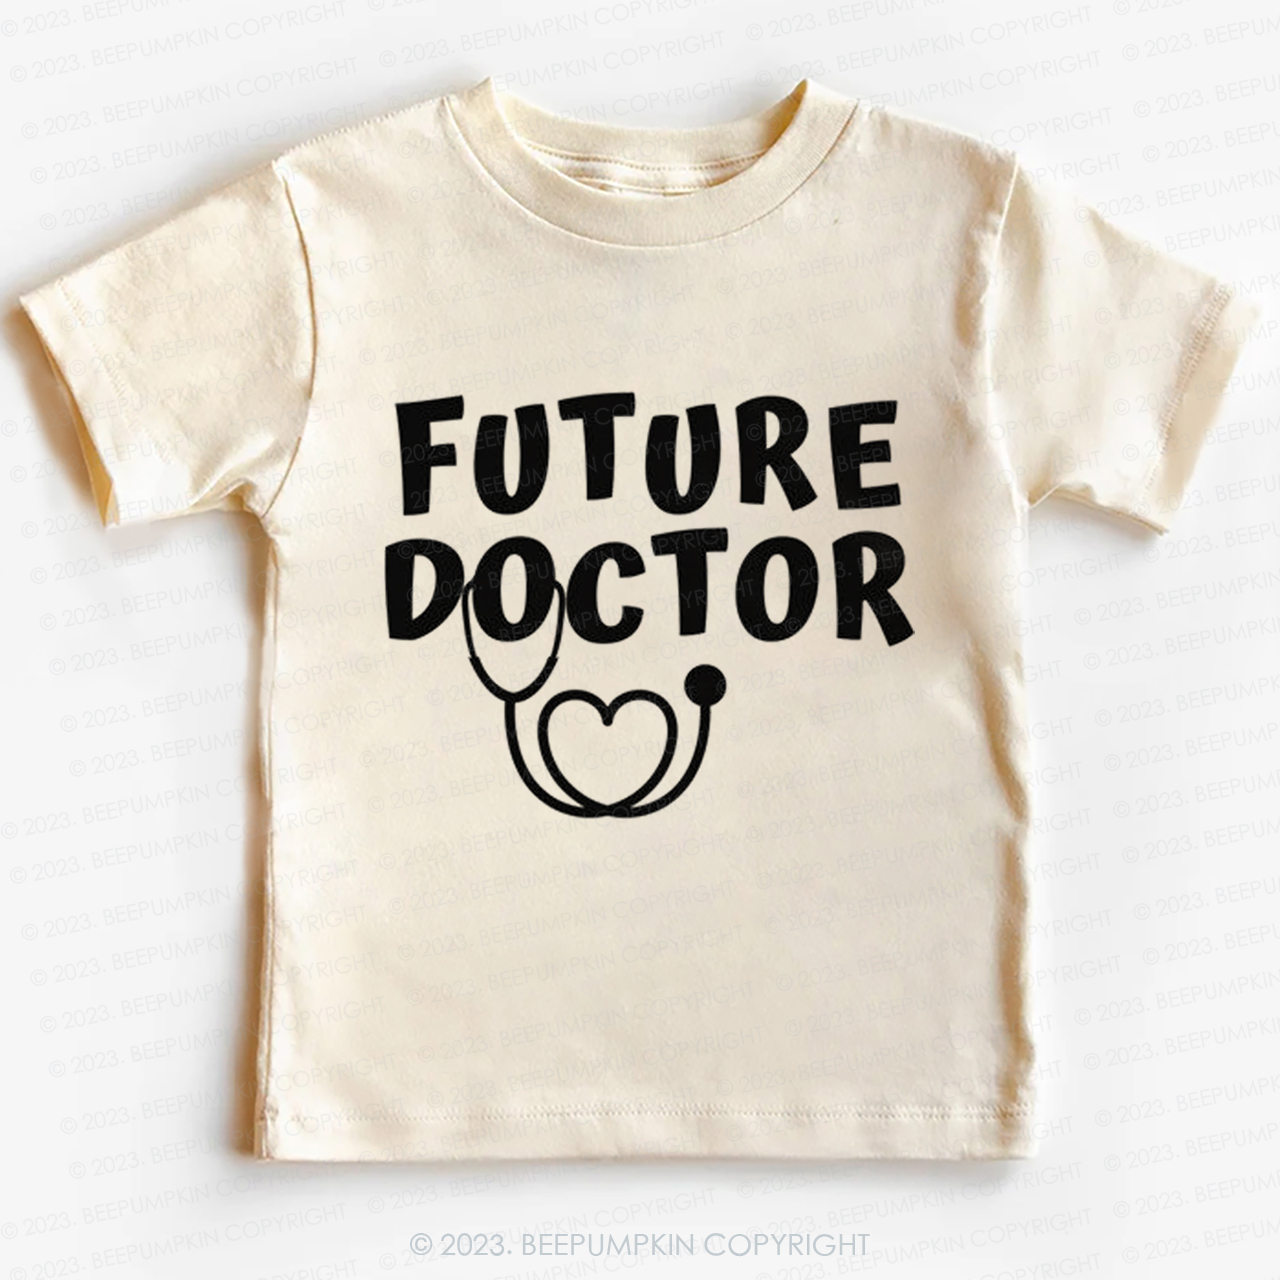 Future doctor -Toddler Tees